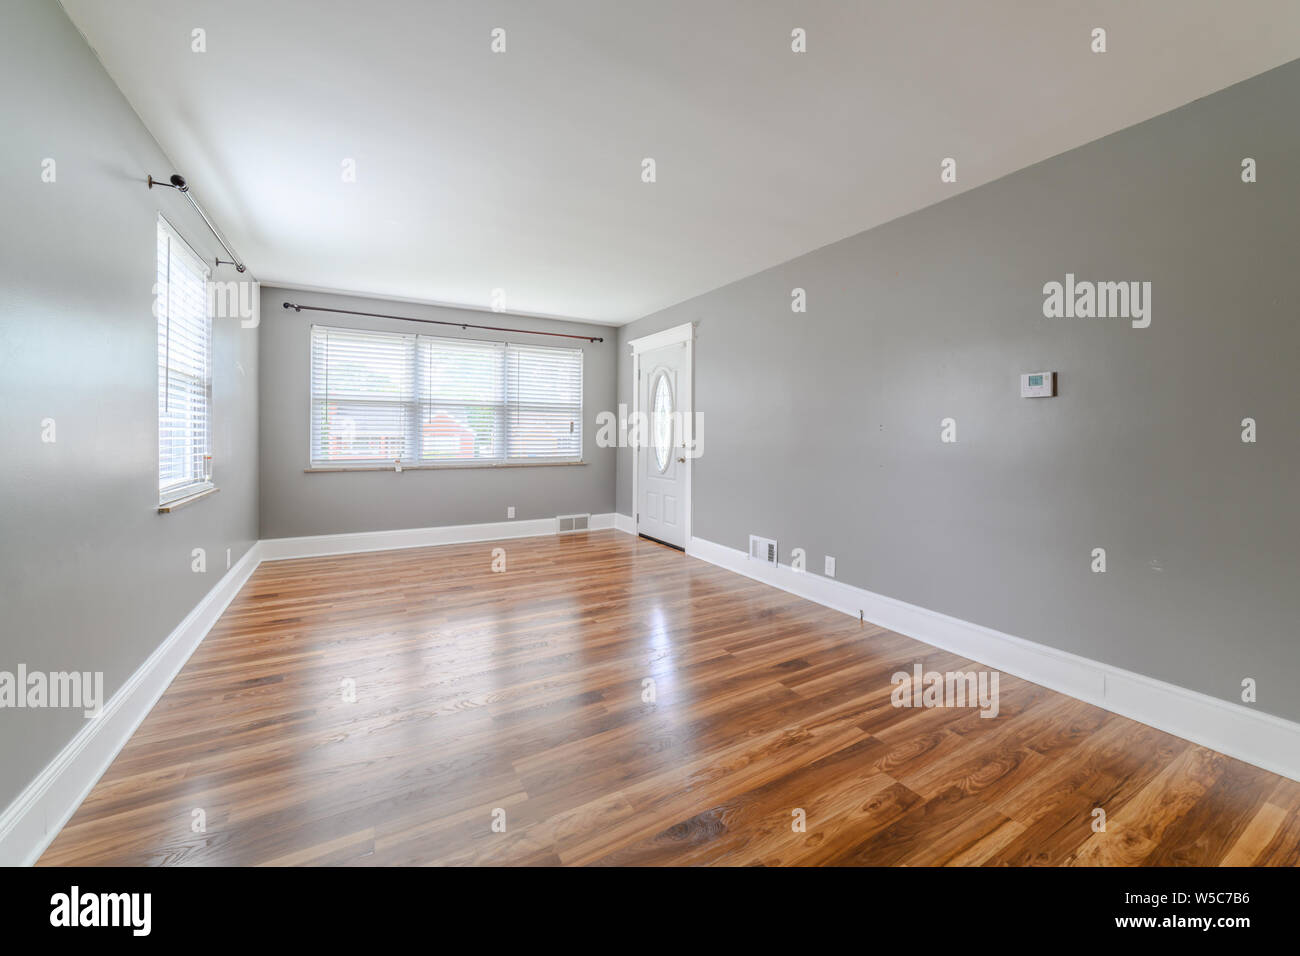 A empty undecorated living room with wooden floors. Stock Photo